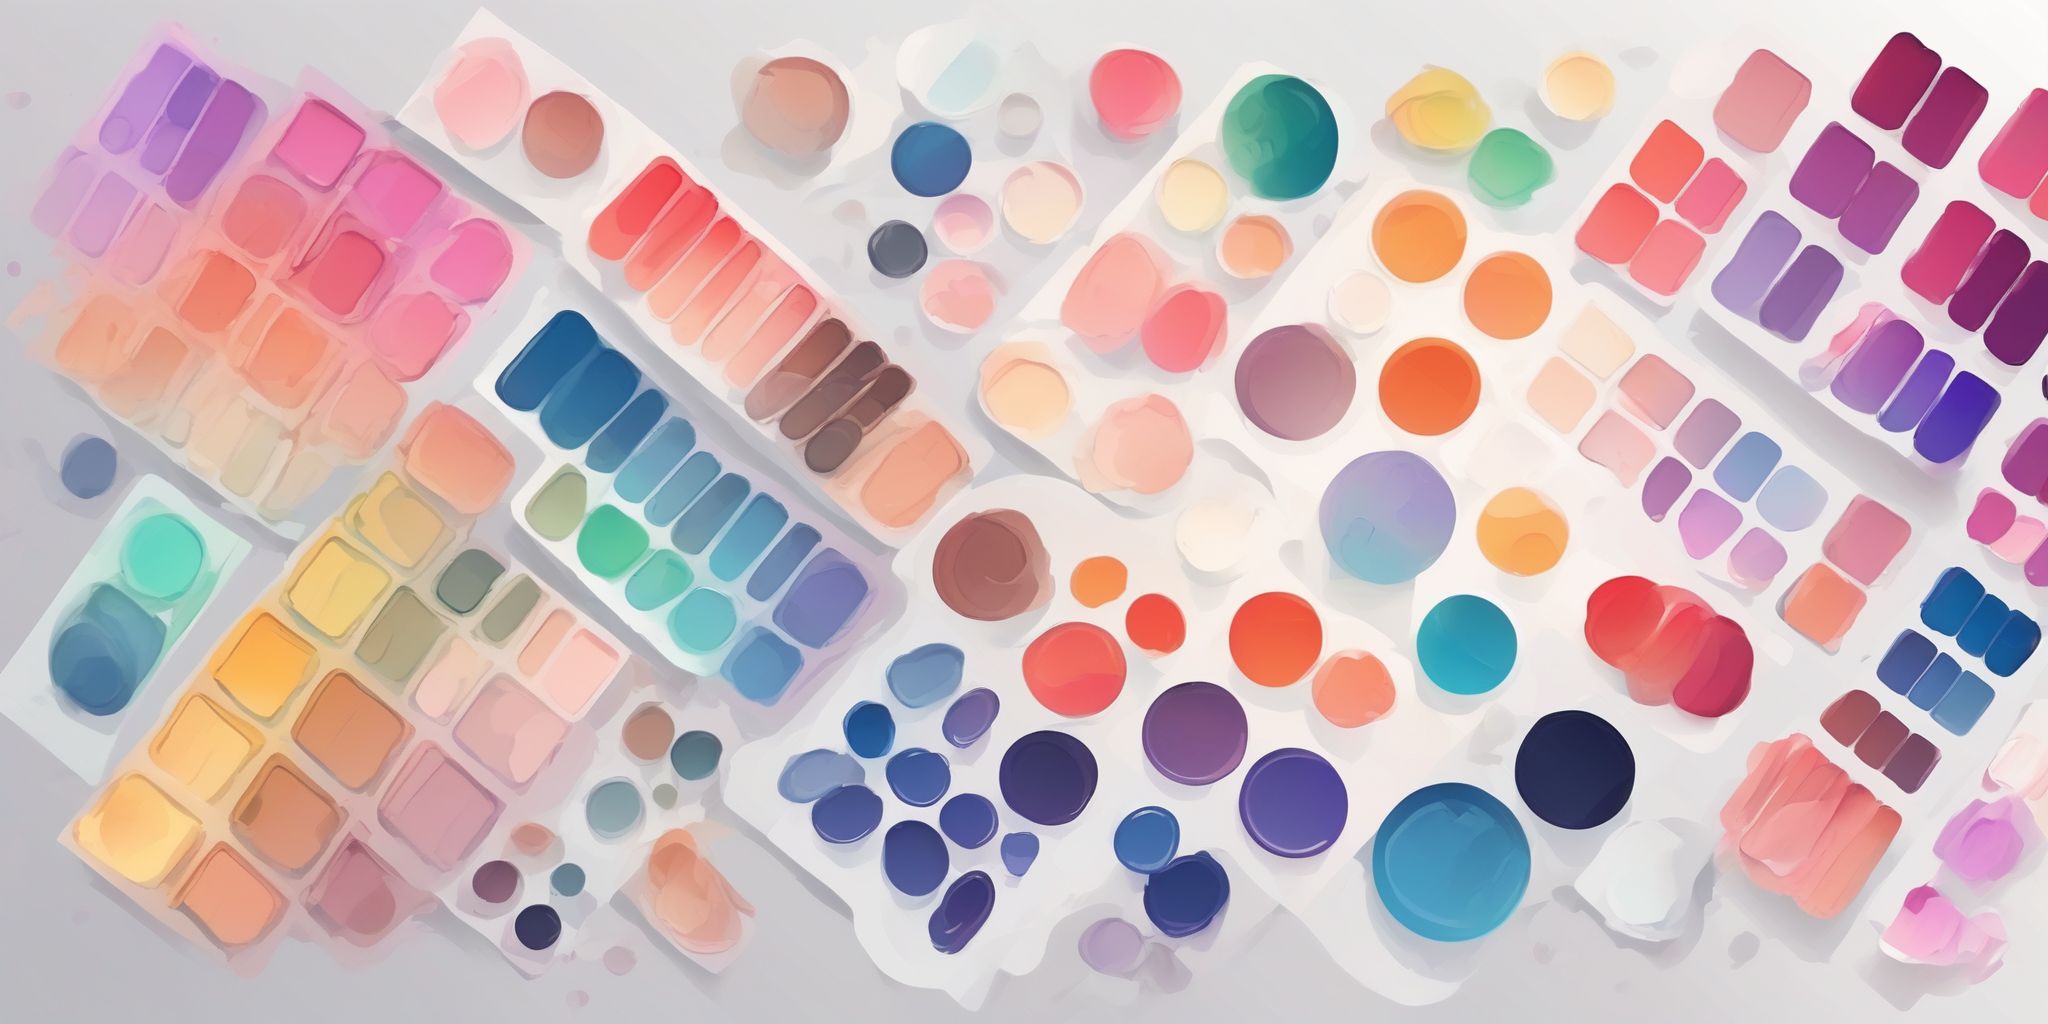 Palette in illustration style with gradients and white background